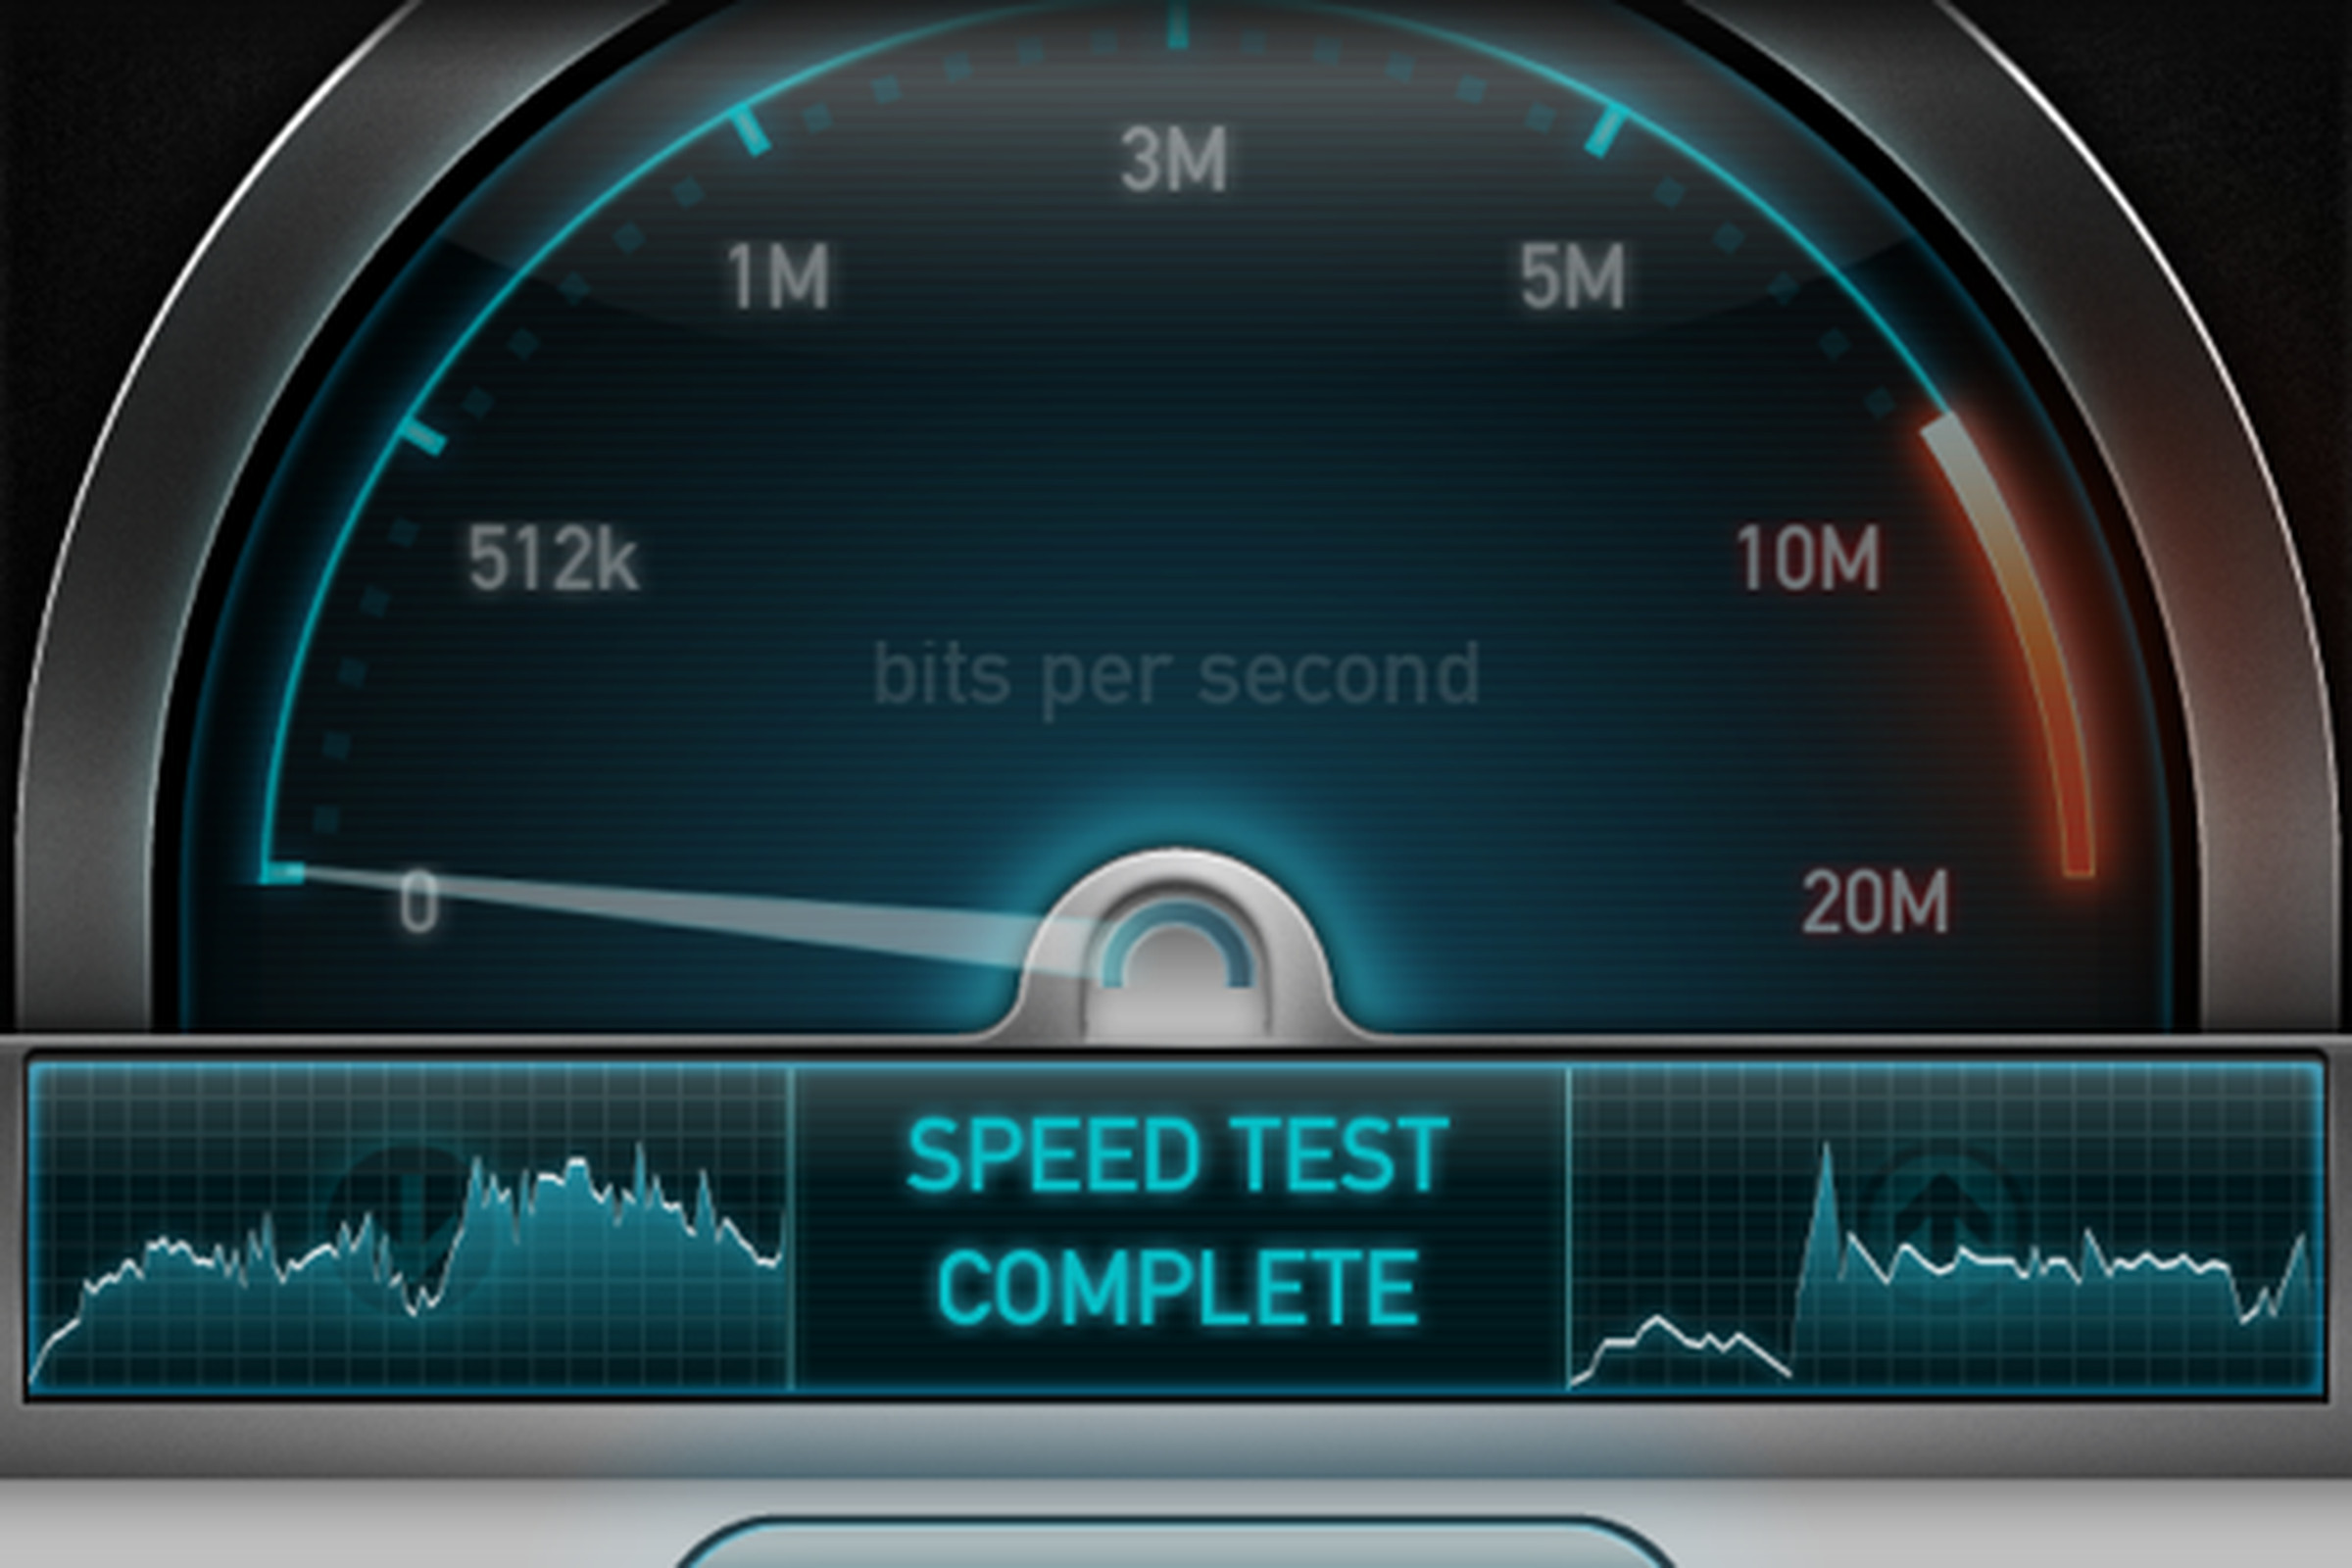 iPhone on T-Mobile 3G